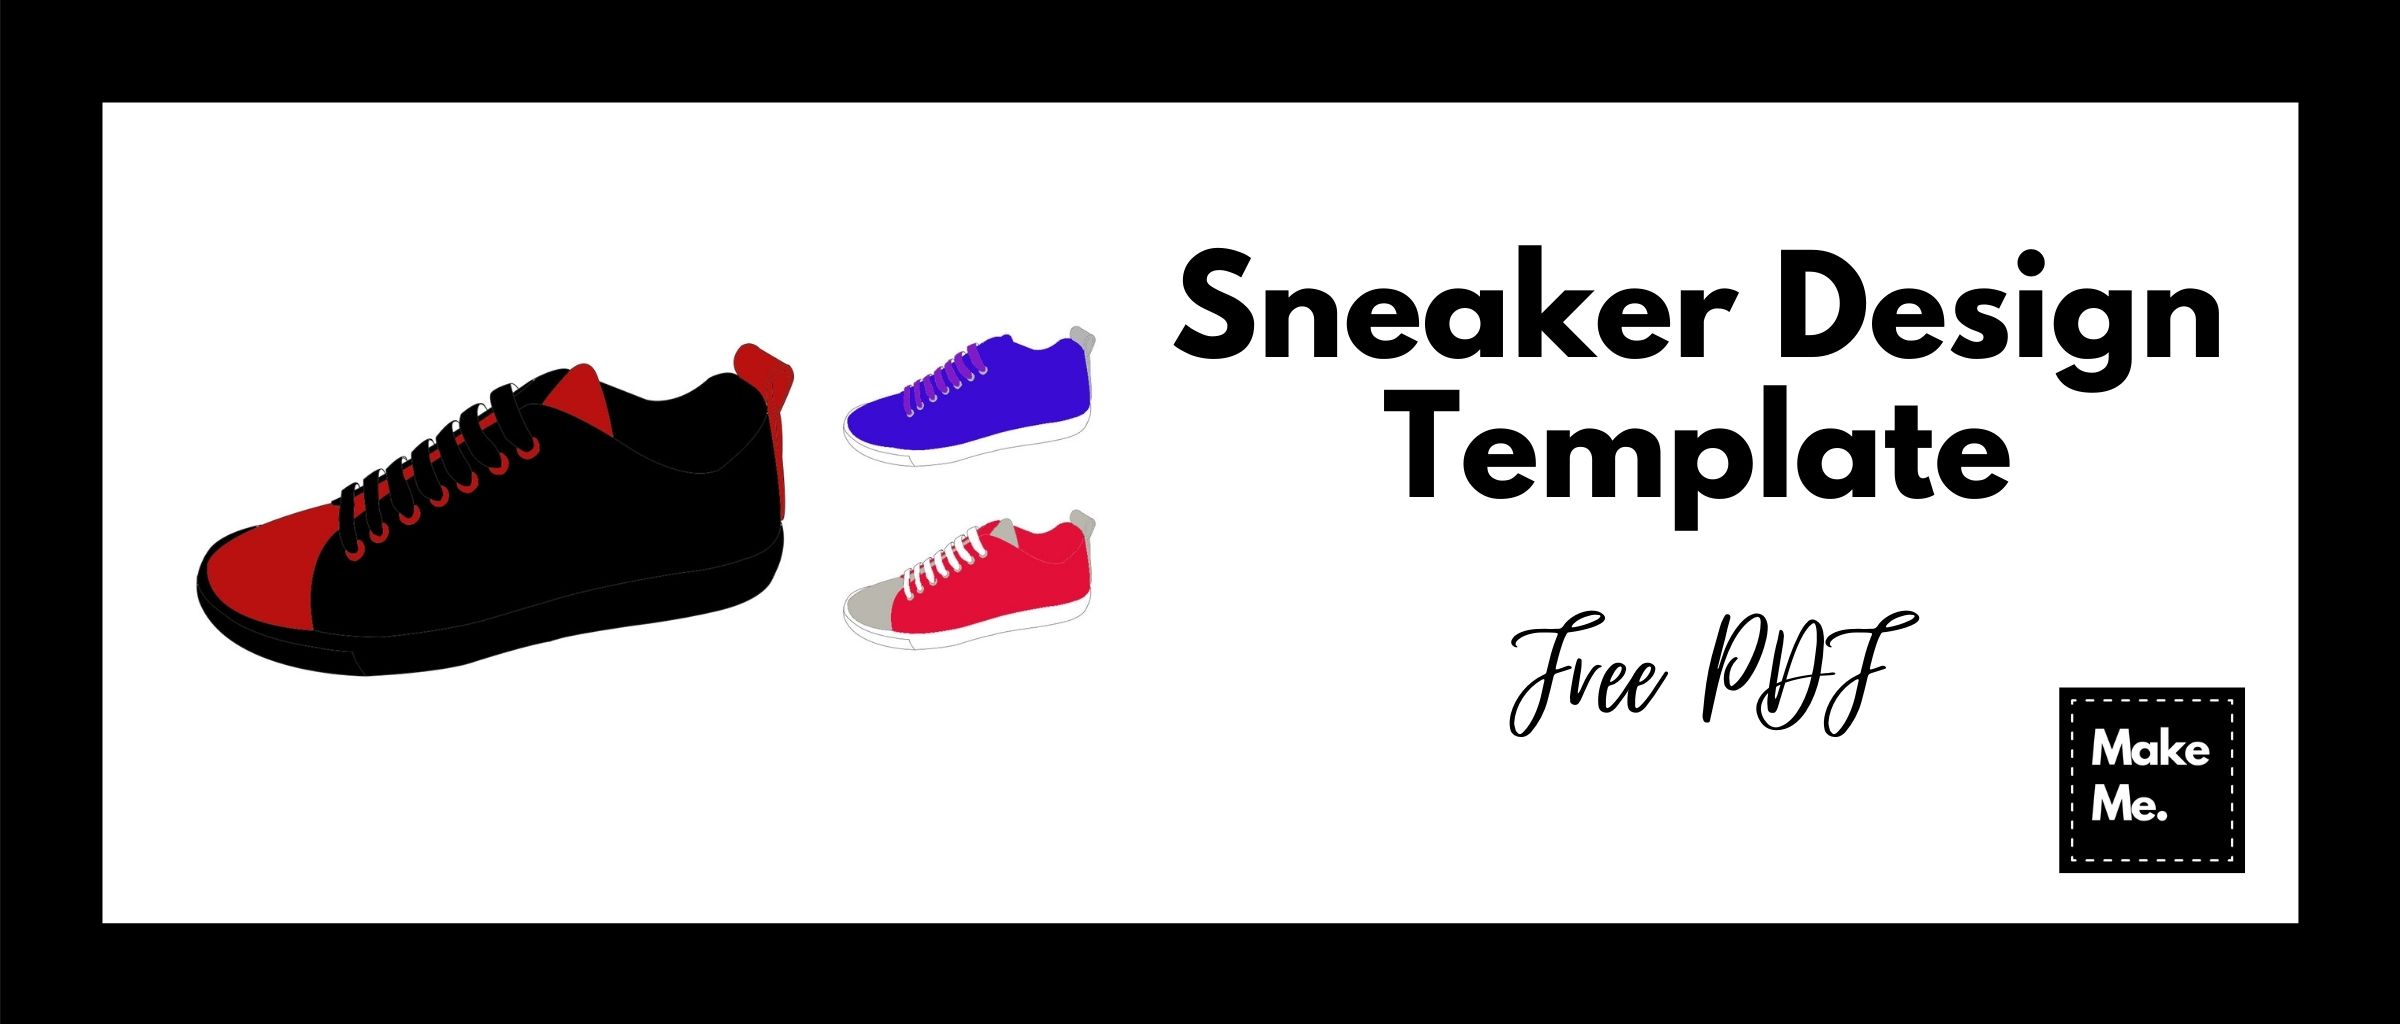 welcome-to-xsimad-enjoy-in-our-website-xsimad-xyz-shoe-template-sneaker-art-shoe-art